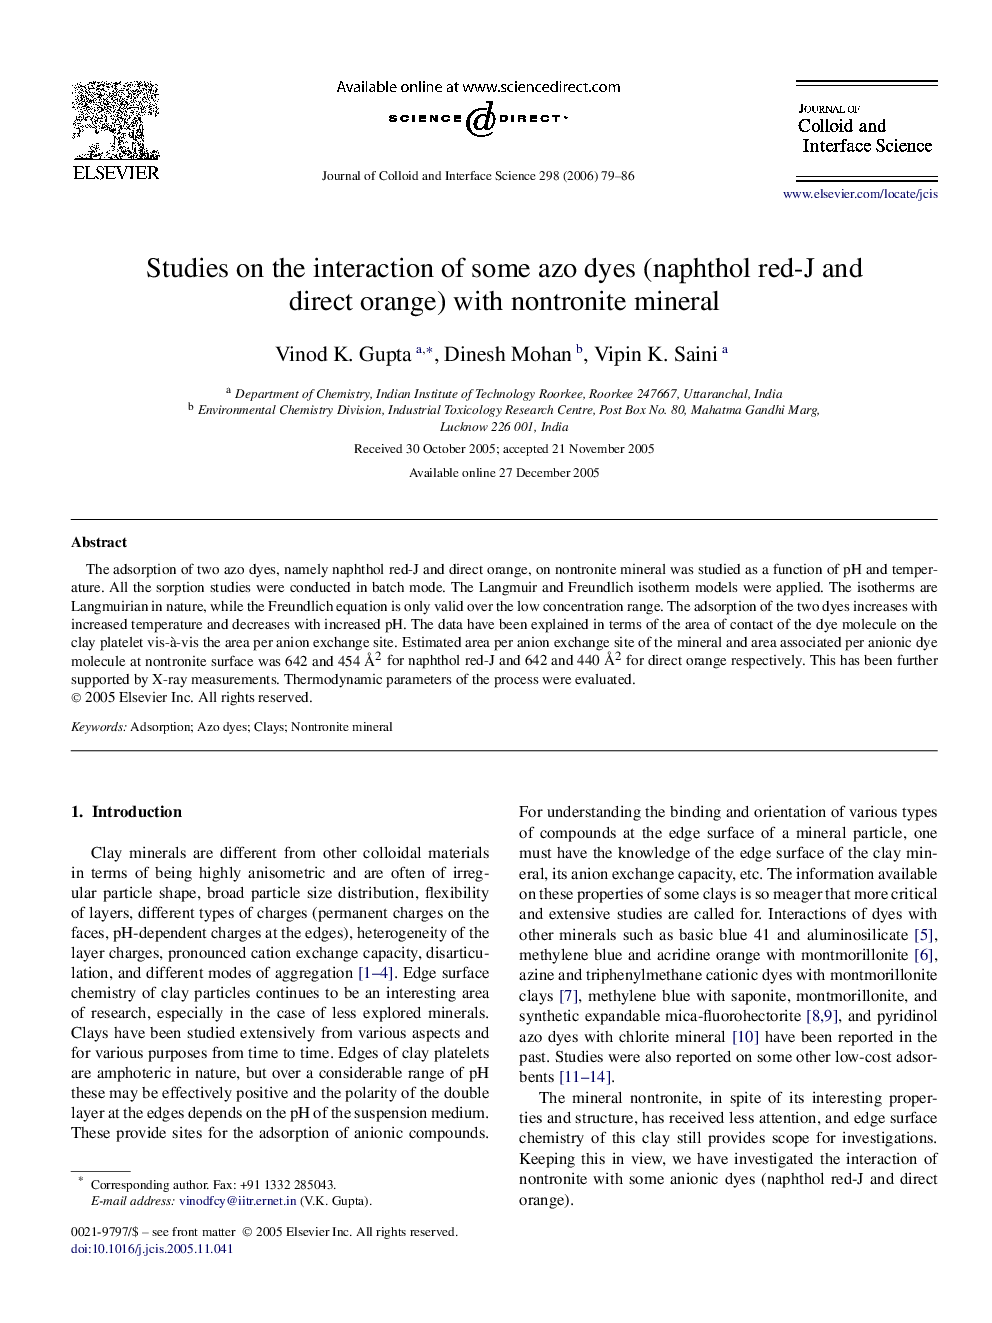 Studies on the interaction of some azo dyes (naphthol red-J and direct orange) with nontronite mineral